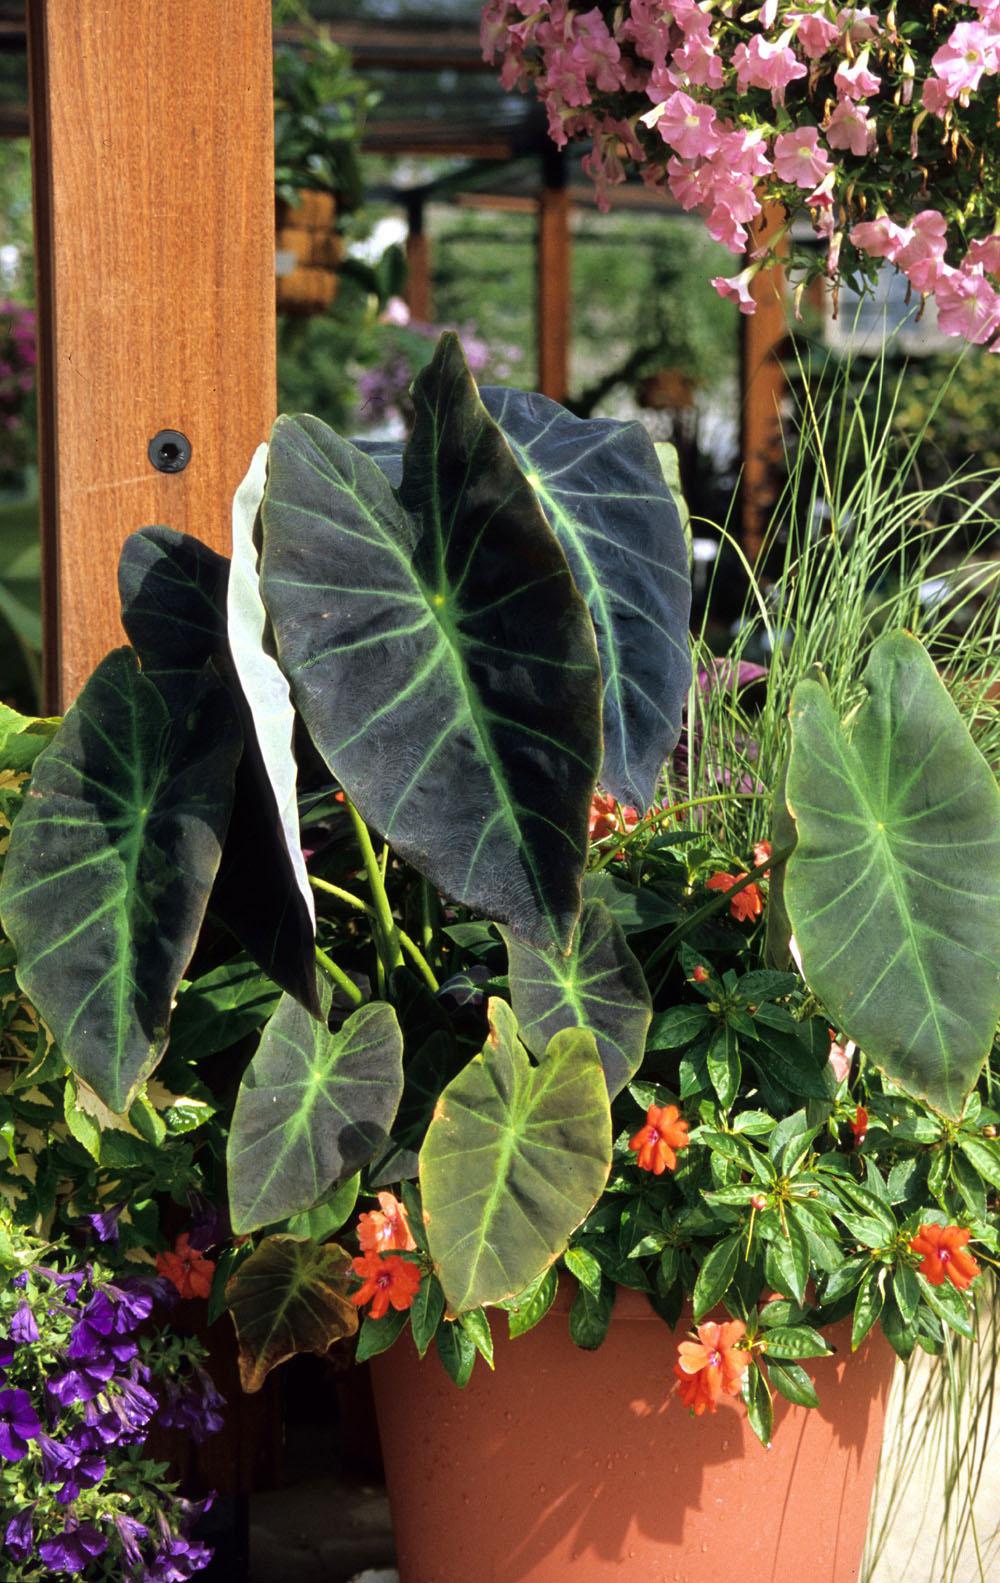 Achieve the tropical look in the garden with Imperial Taro. This cold-hardy elephant ear is thriving in a mixed-container setting, but it also will grow well in landscapes with other tropical plants such as cannas, gingers and bananas.